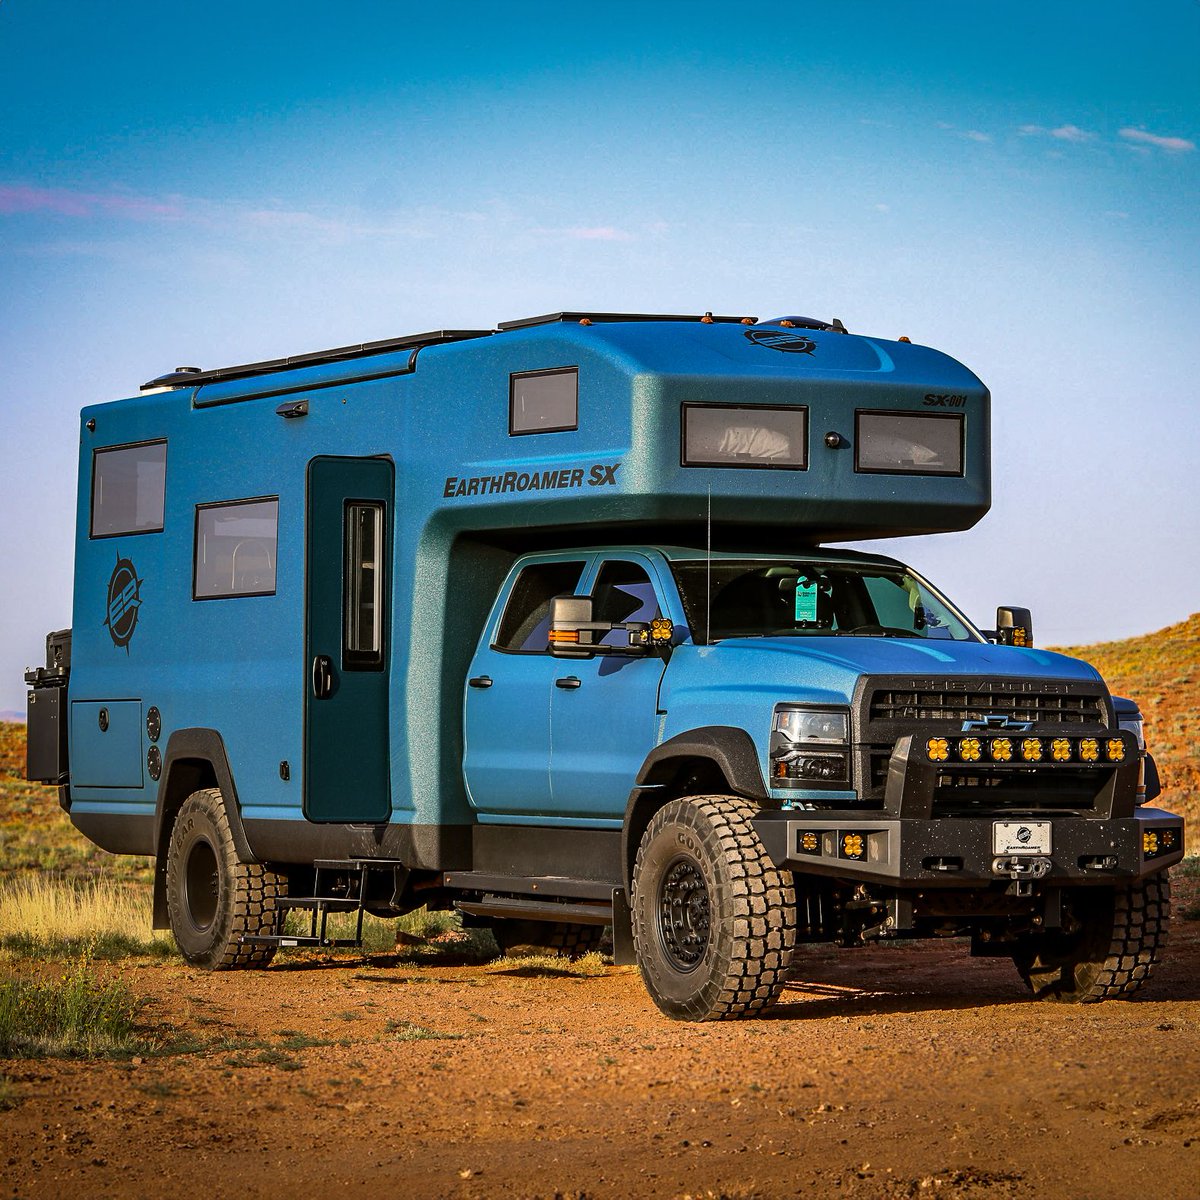 We love the SX in this blue! What do you think? · · · #earthroamer #offroad4x4 #expeditionvehicle #campinglife #overlanding #4x4life #4x4trucks #vanlife #vanlifeadventures